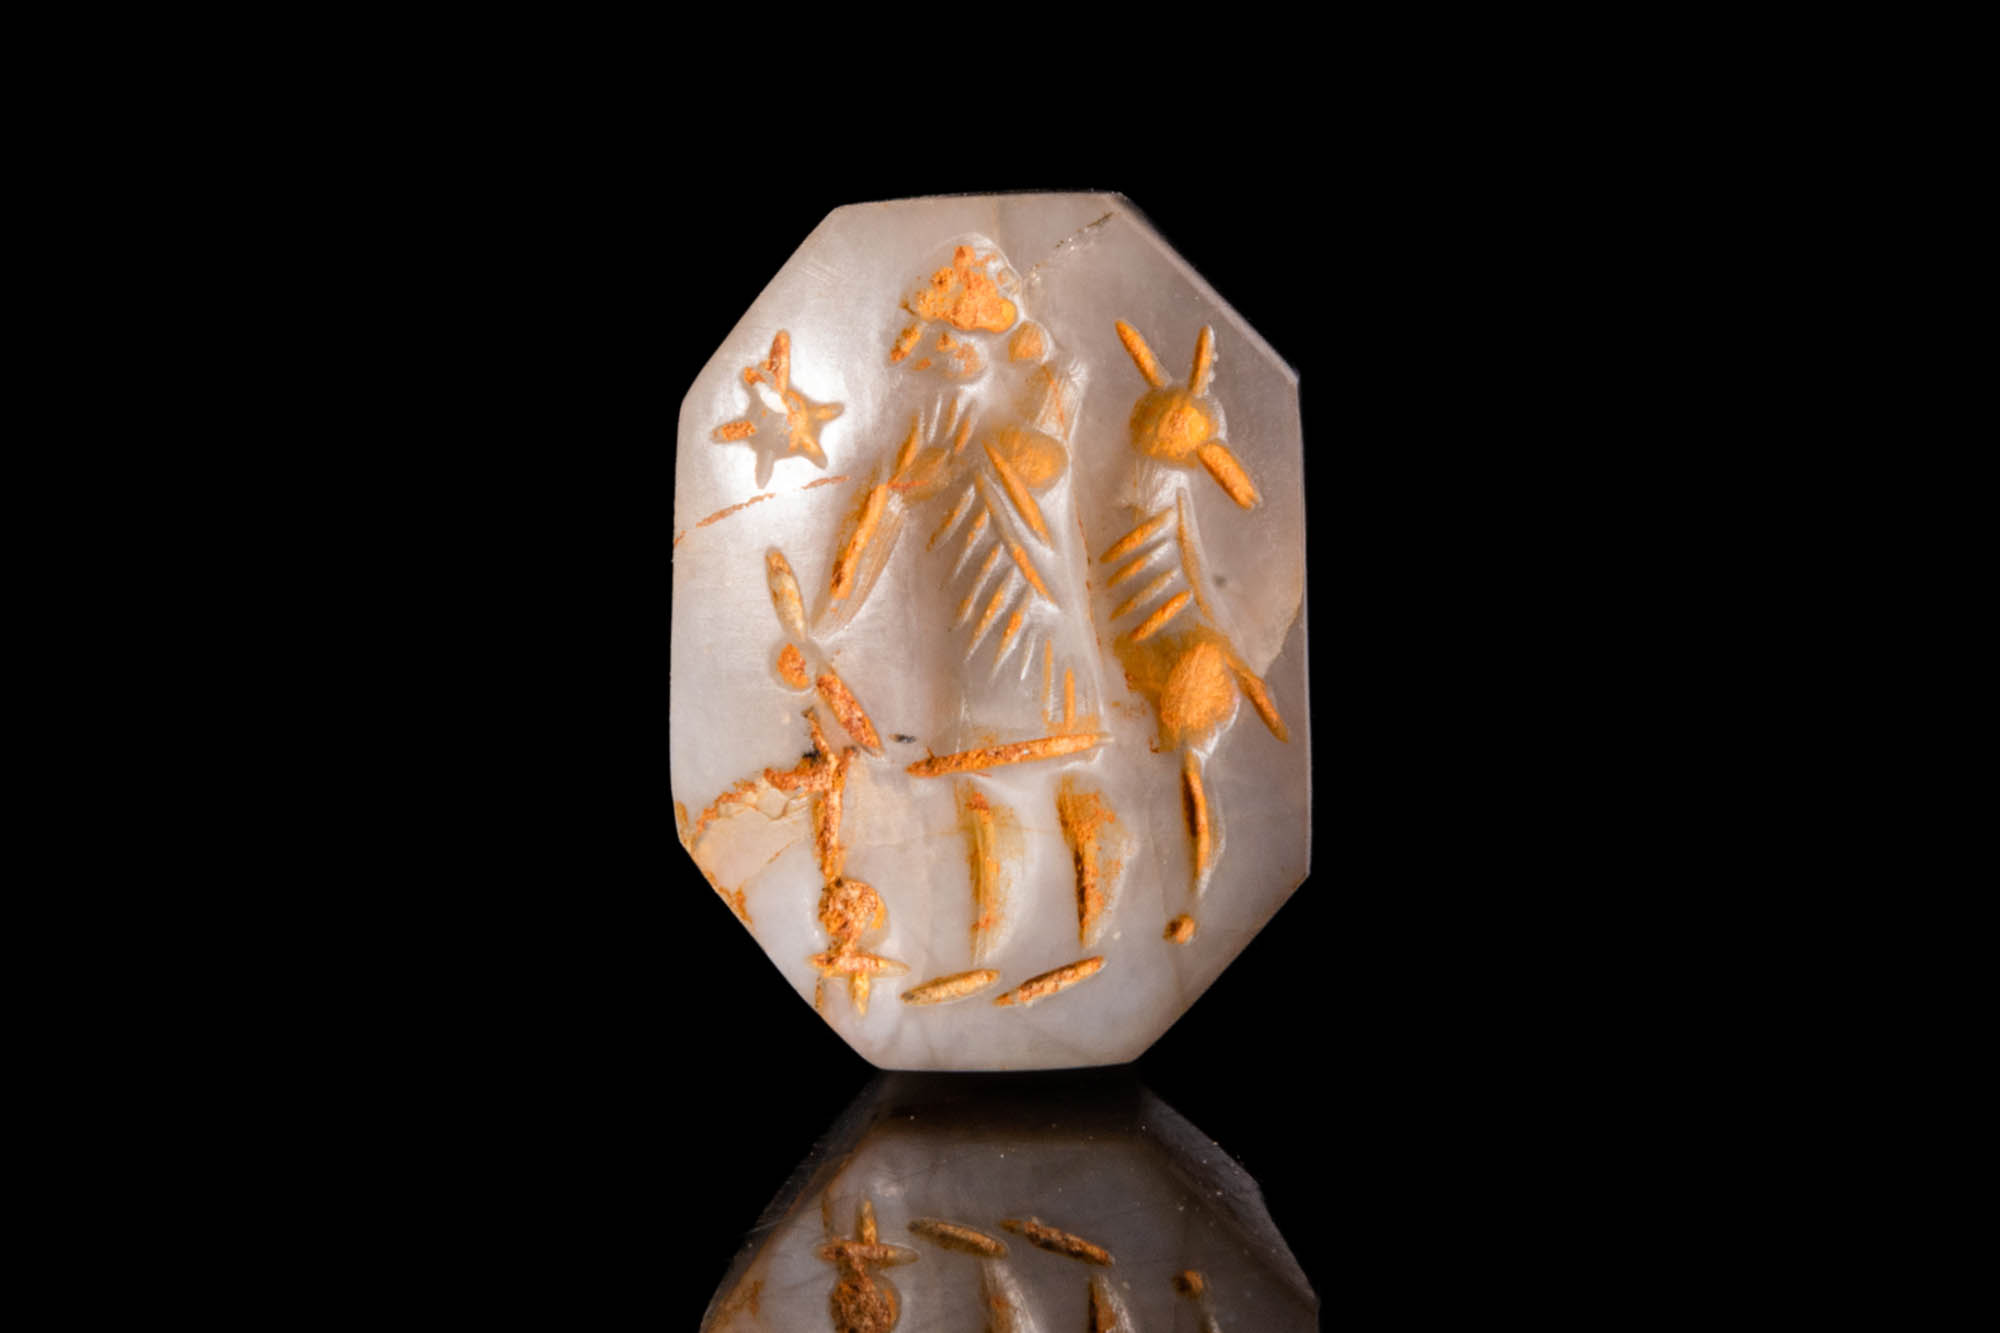 NEO - BABYLONIAN STAMP SEAL DEPICTING A STANDING GOD WITH A HORNED TIARA - Image 3 of 4